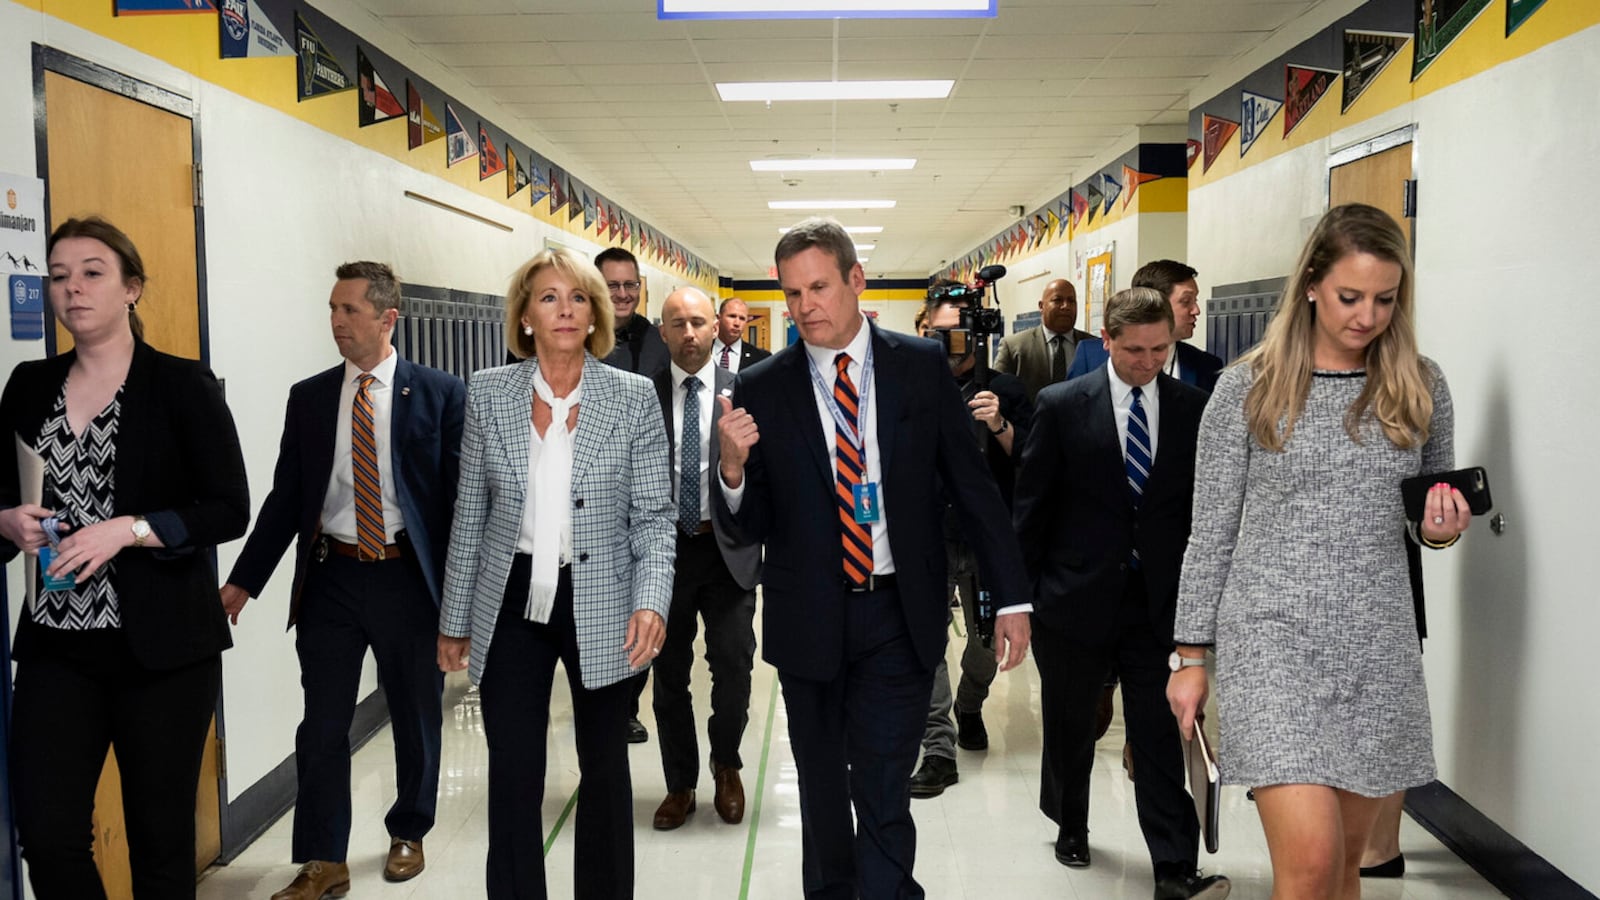 Gov. Bill Lee tours a Nashville charter school with U.S. Secretary of Education Betsy DeVos, who is also a charter school advocate and philanthropist.